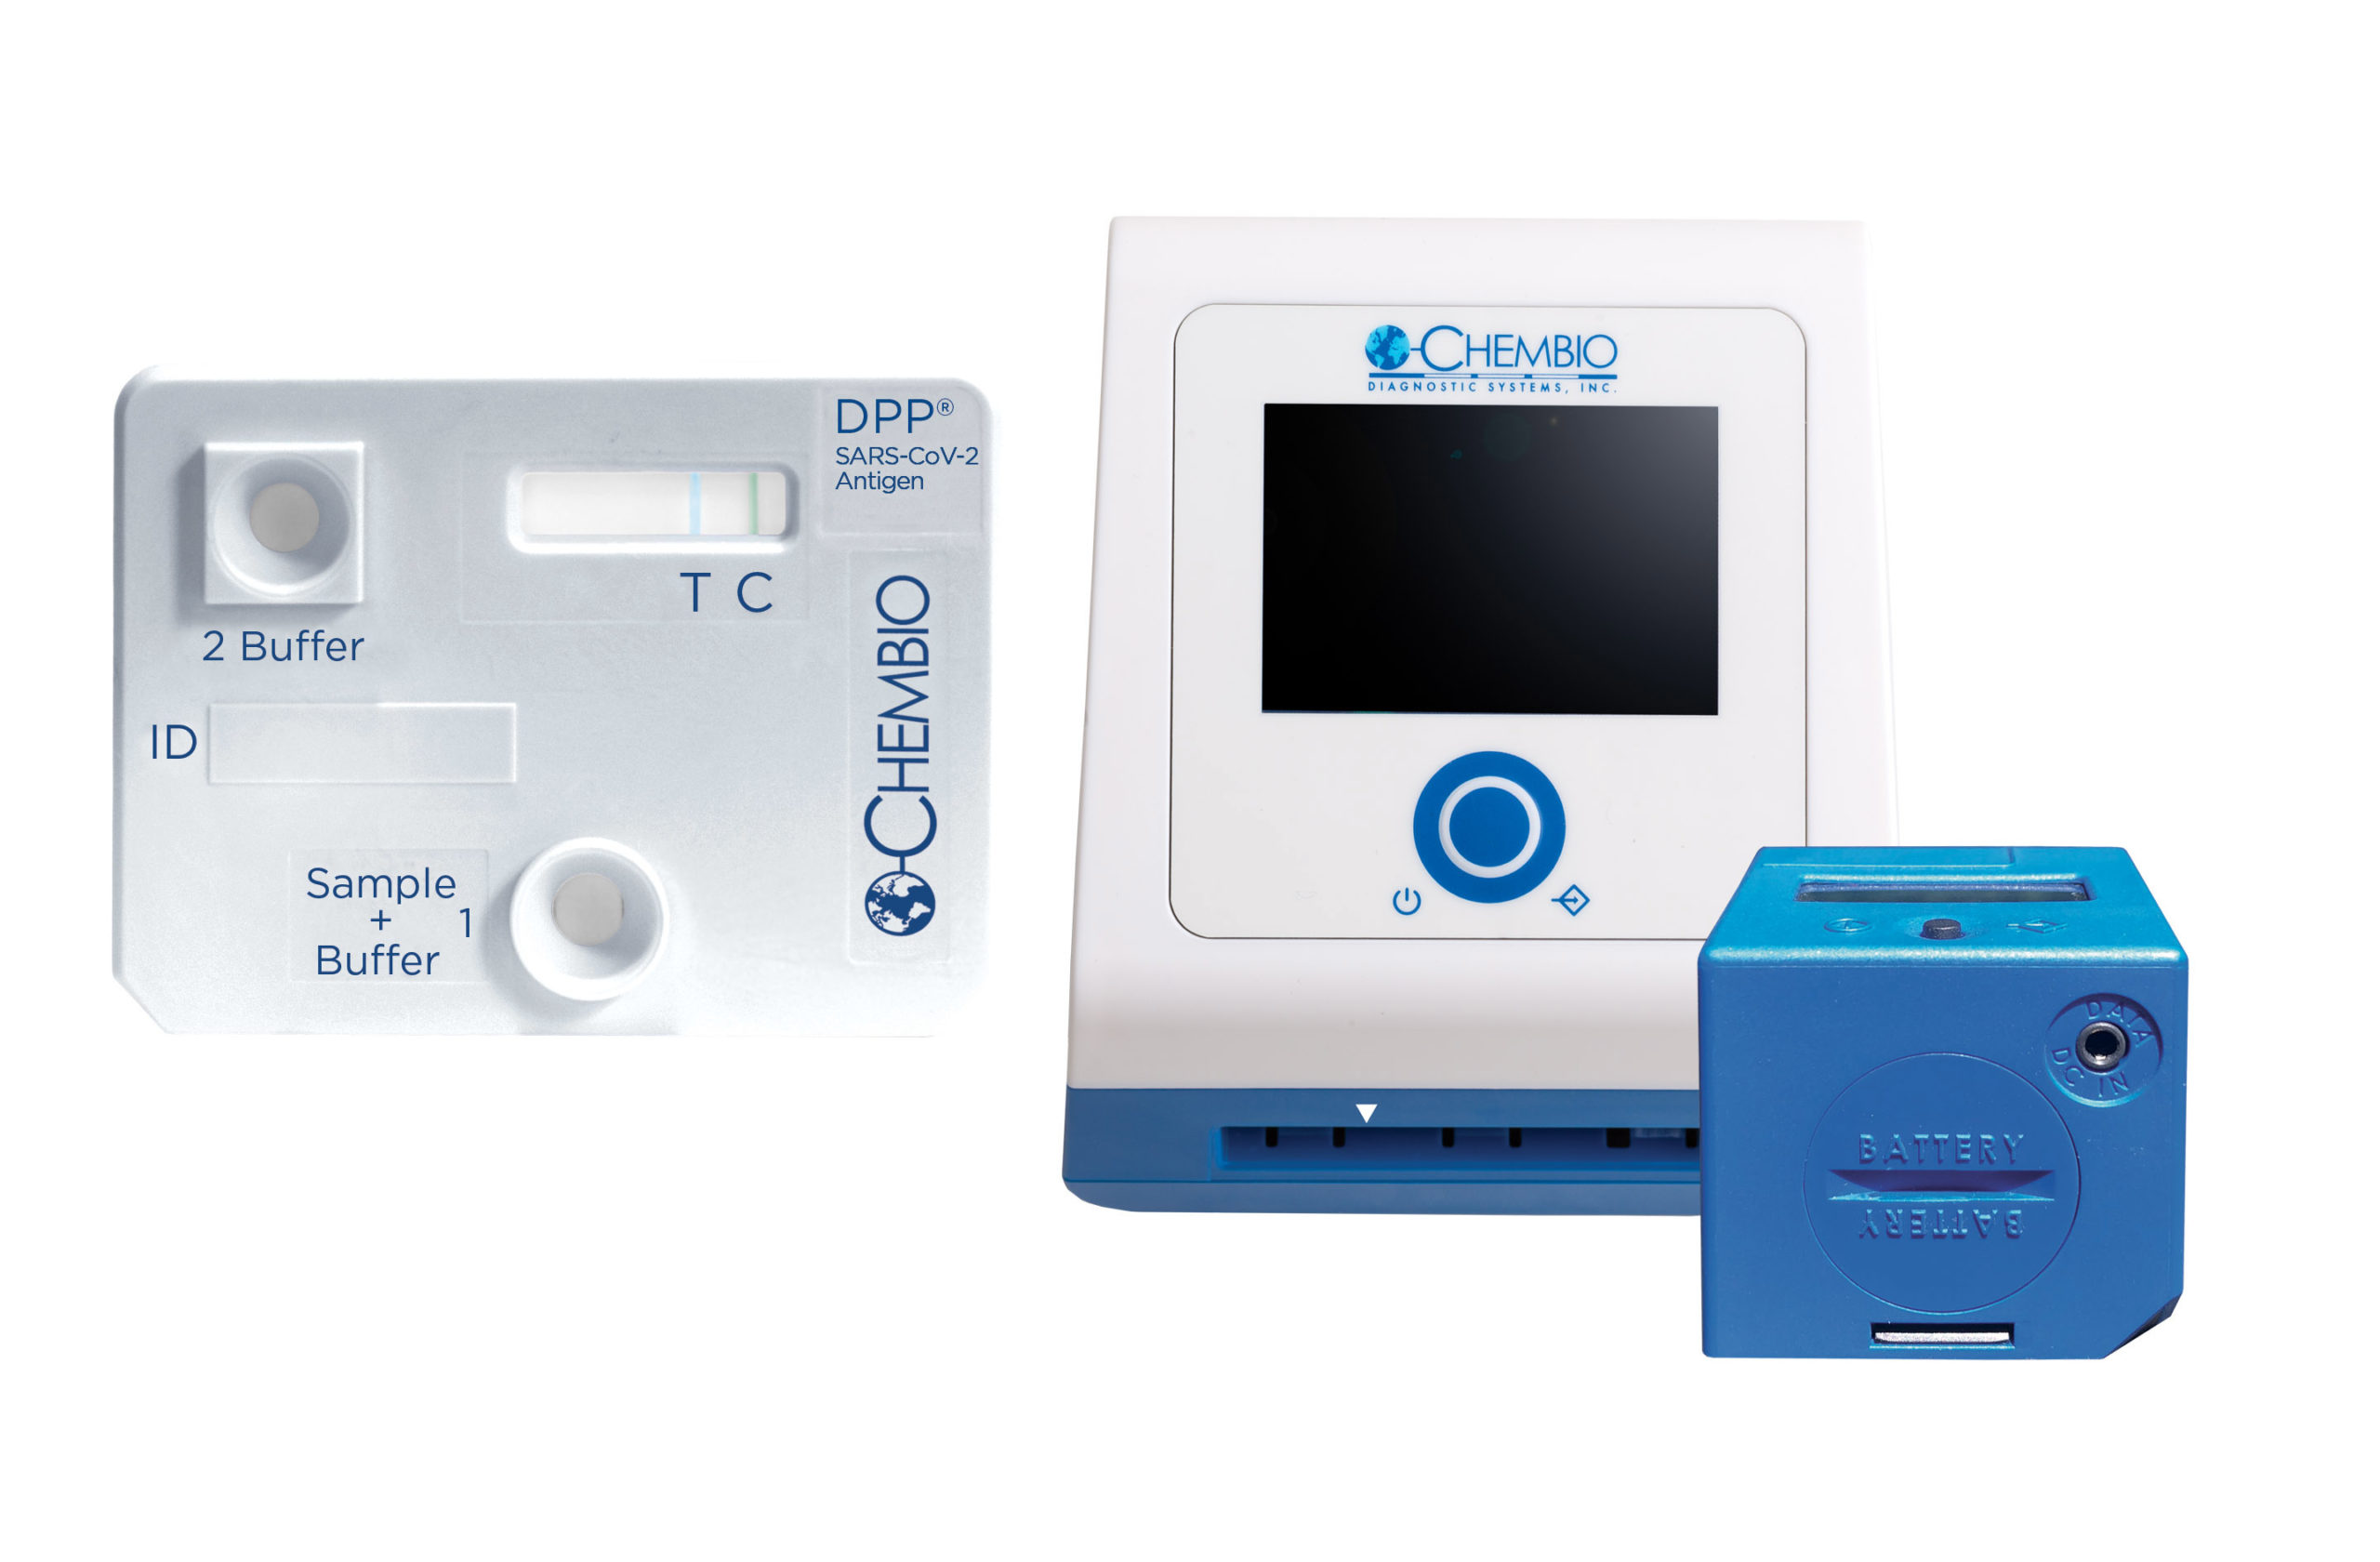 Chembio Diagnostics Awarded $12.7 Million by BARDA for Development of Rapid DPP Respiratory Antigen Panel and 510(k) Submission of the Rapid DPP SARS-CoV-2 Antigen Test System